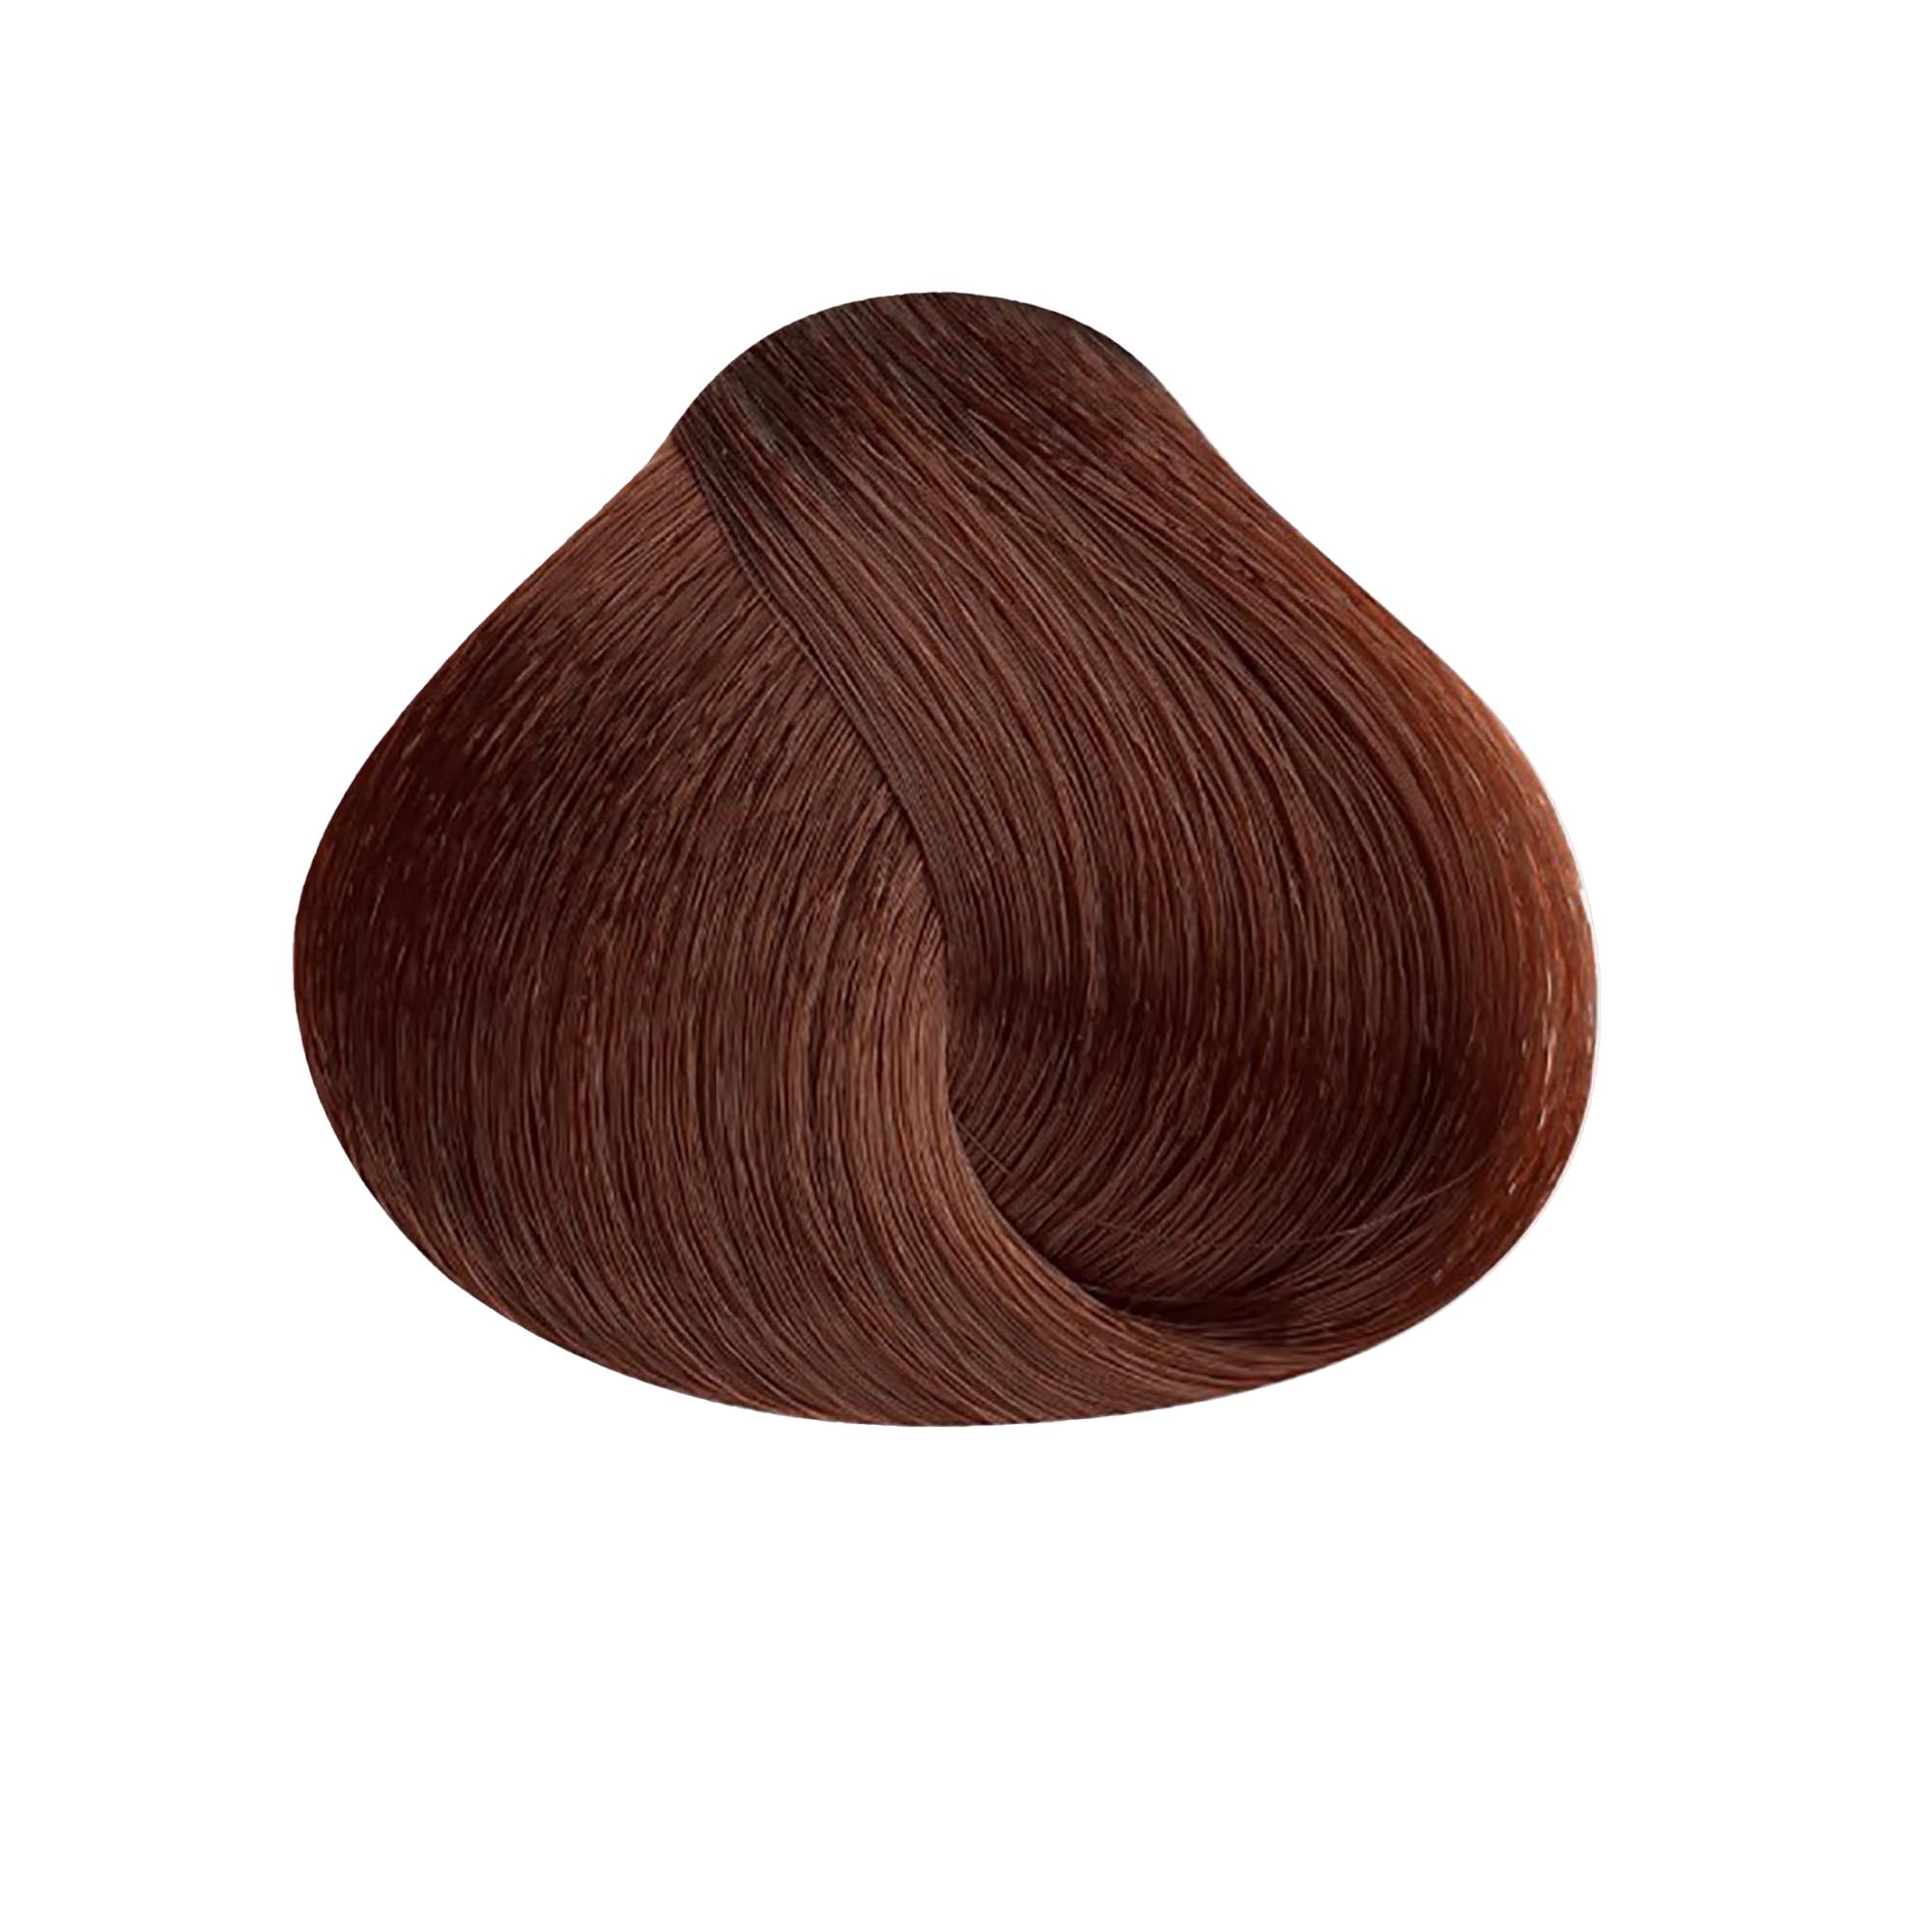 Satin Professional Hair Color / 6RC Dark Red Copper Blonde / Swatch